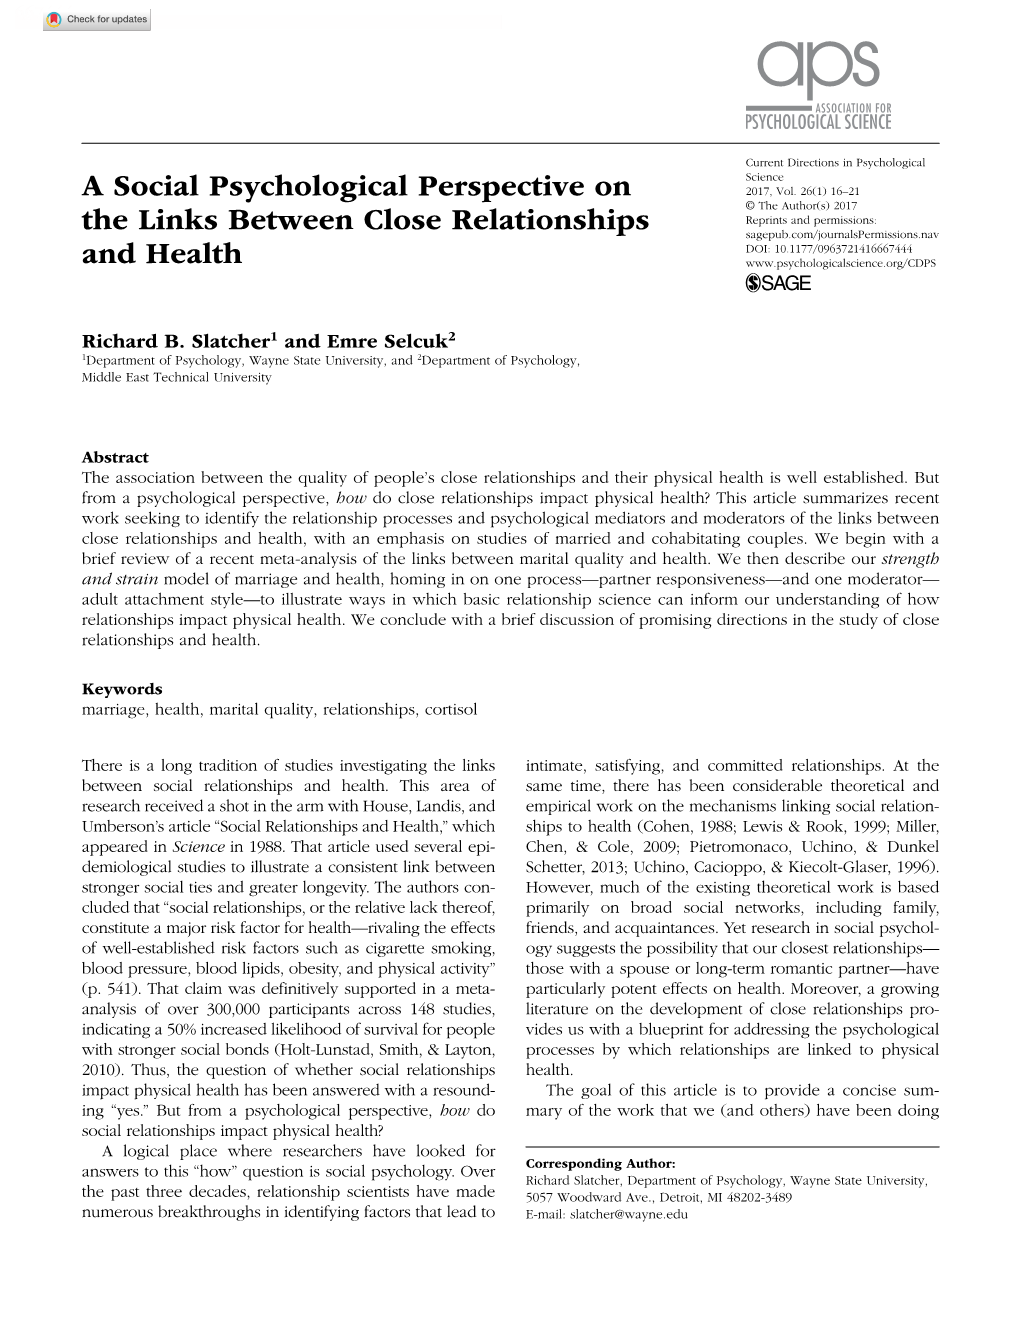 A Social Psychological Perspective on the Links Between Close